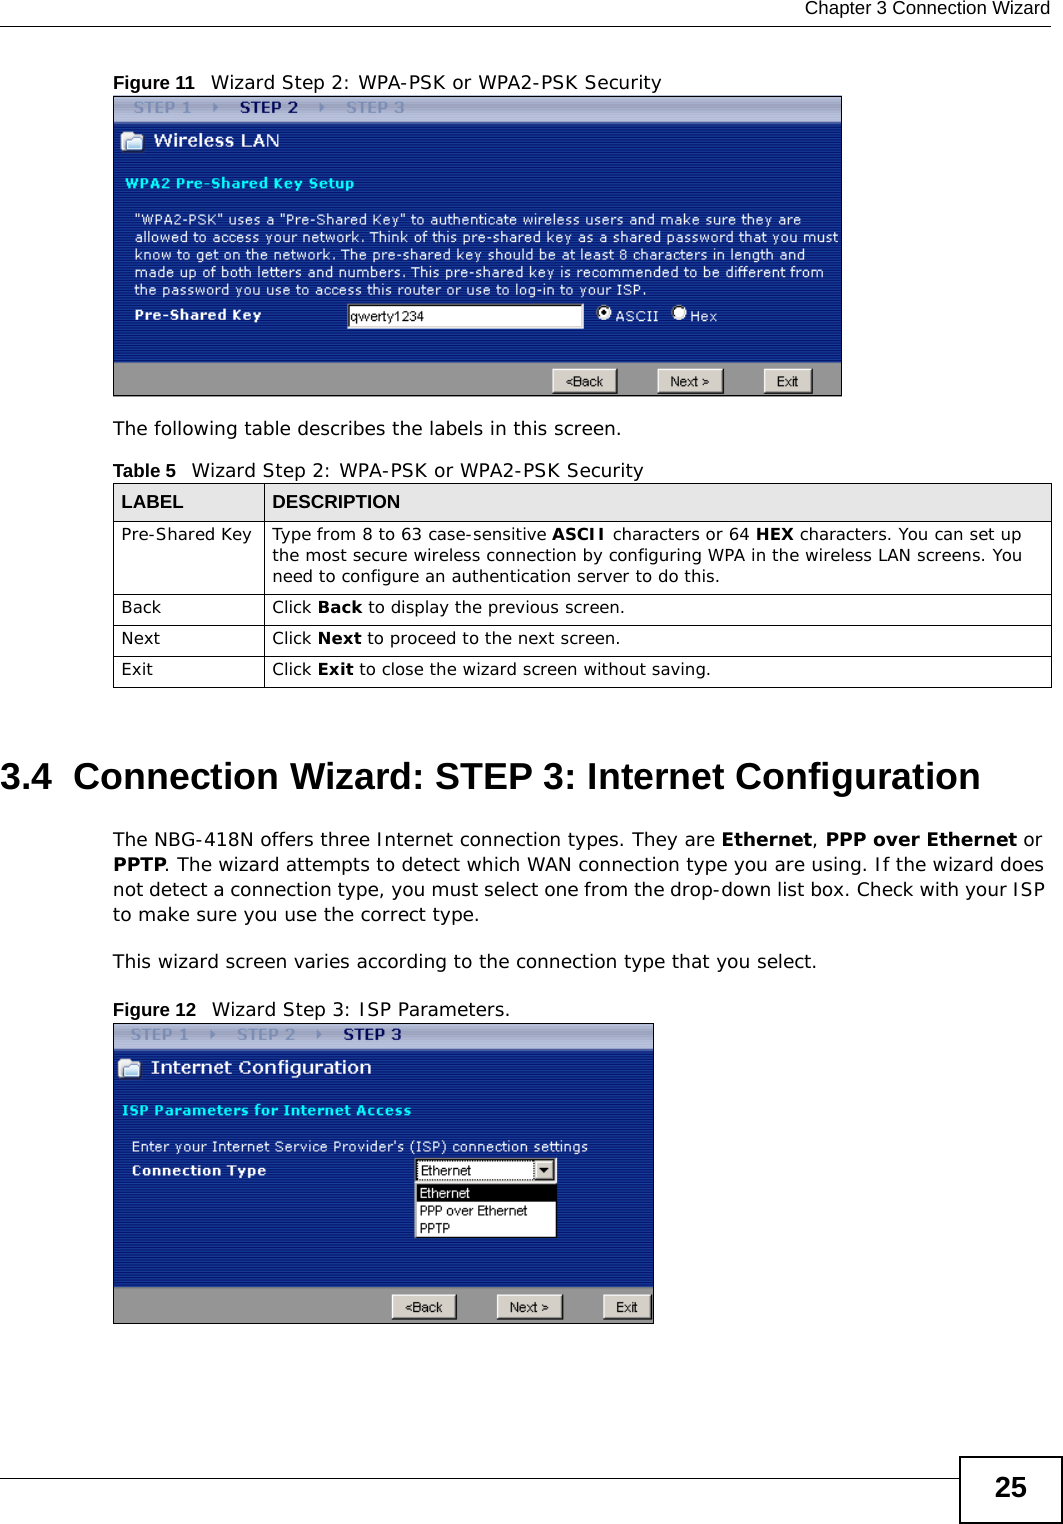  Chapter 3 Connection Wizard25Figure 11   Wizard Step 2: WPA-PSK or WPA2-PSK SecurityThe following table describes the labels in this screen. 3.4  Connection Wizard: STEP 3: Internet ConfigurationThe NBG-418N offers three Internet connection types. They are Ethernet, PPP over Ethernet or PPTP. The wizard attempts to detect which WAN connection type you are using. If the wizard does not detect a connection type, you must select one from the drop-down list box. Check with your ISP to make sure you use the correct type.This wizard screen varies according to the connection type that you select.Figure 12   Wizard Step 3: ISP Parameters.Table 5   Wizard Step 2: WPA-PSK or WPA2-PSK SecurityLABEL DESCRIPTIONPre-Shared Key Type from 8 to 63 case-sensitive ASCII characters or 64 HEX characters. You can set up the most secure wireless connection by configuring WPA in the wireless LAN screens. You need to configure an authentication server to do this.Back Click Back to display the previous screen.NextClick Next to proceed to the next screen. ExitClick Exit to close the wizard screen without saving.